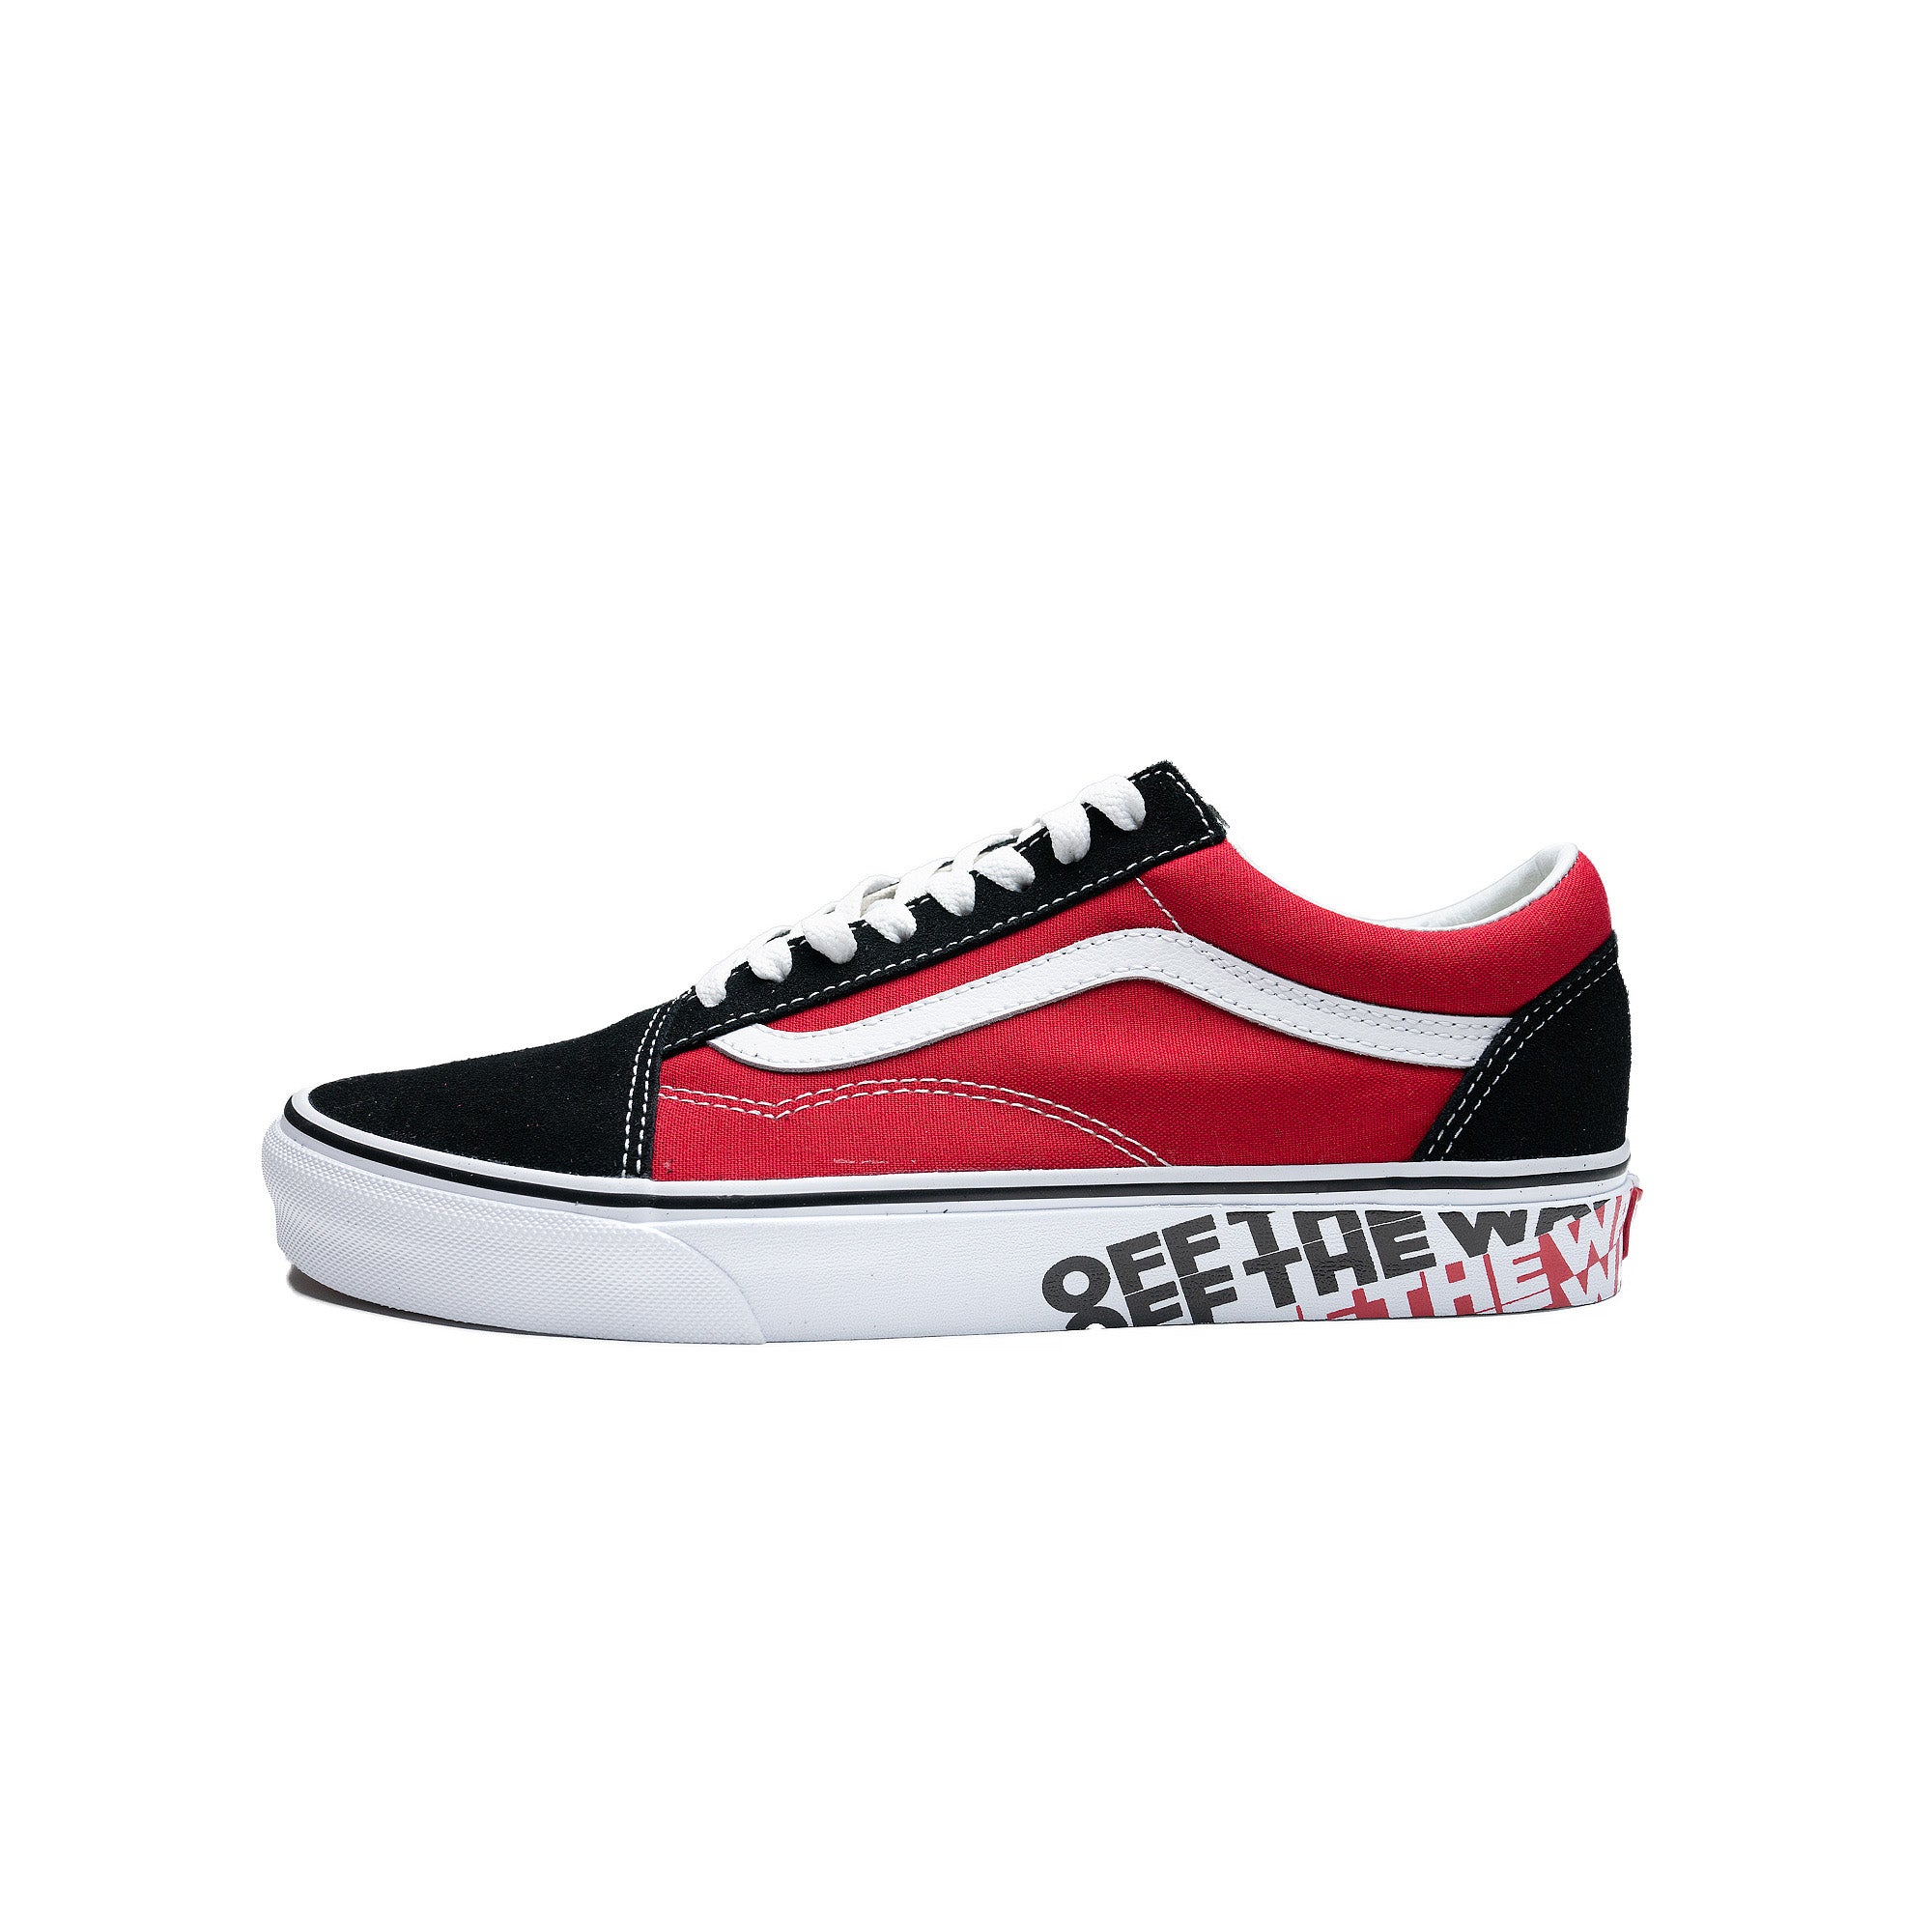 the vans off the wall